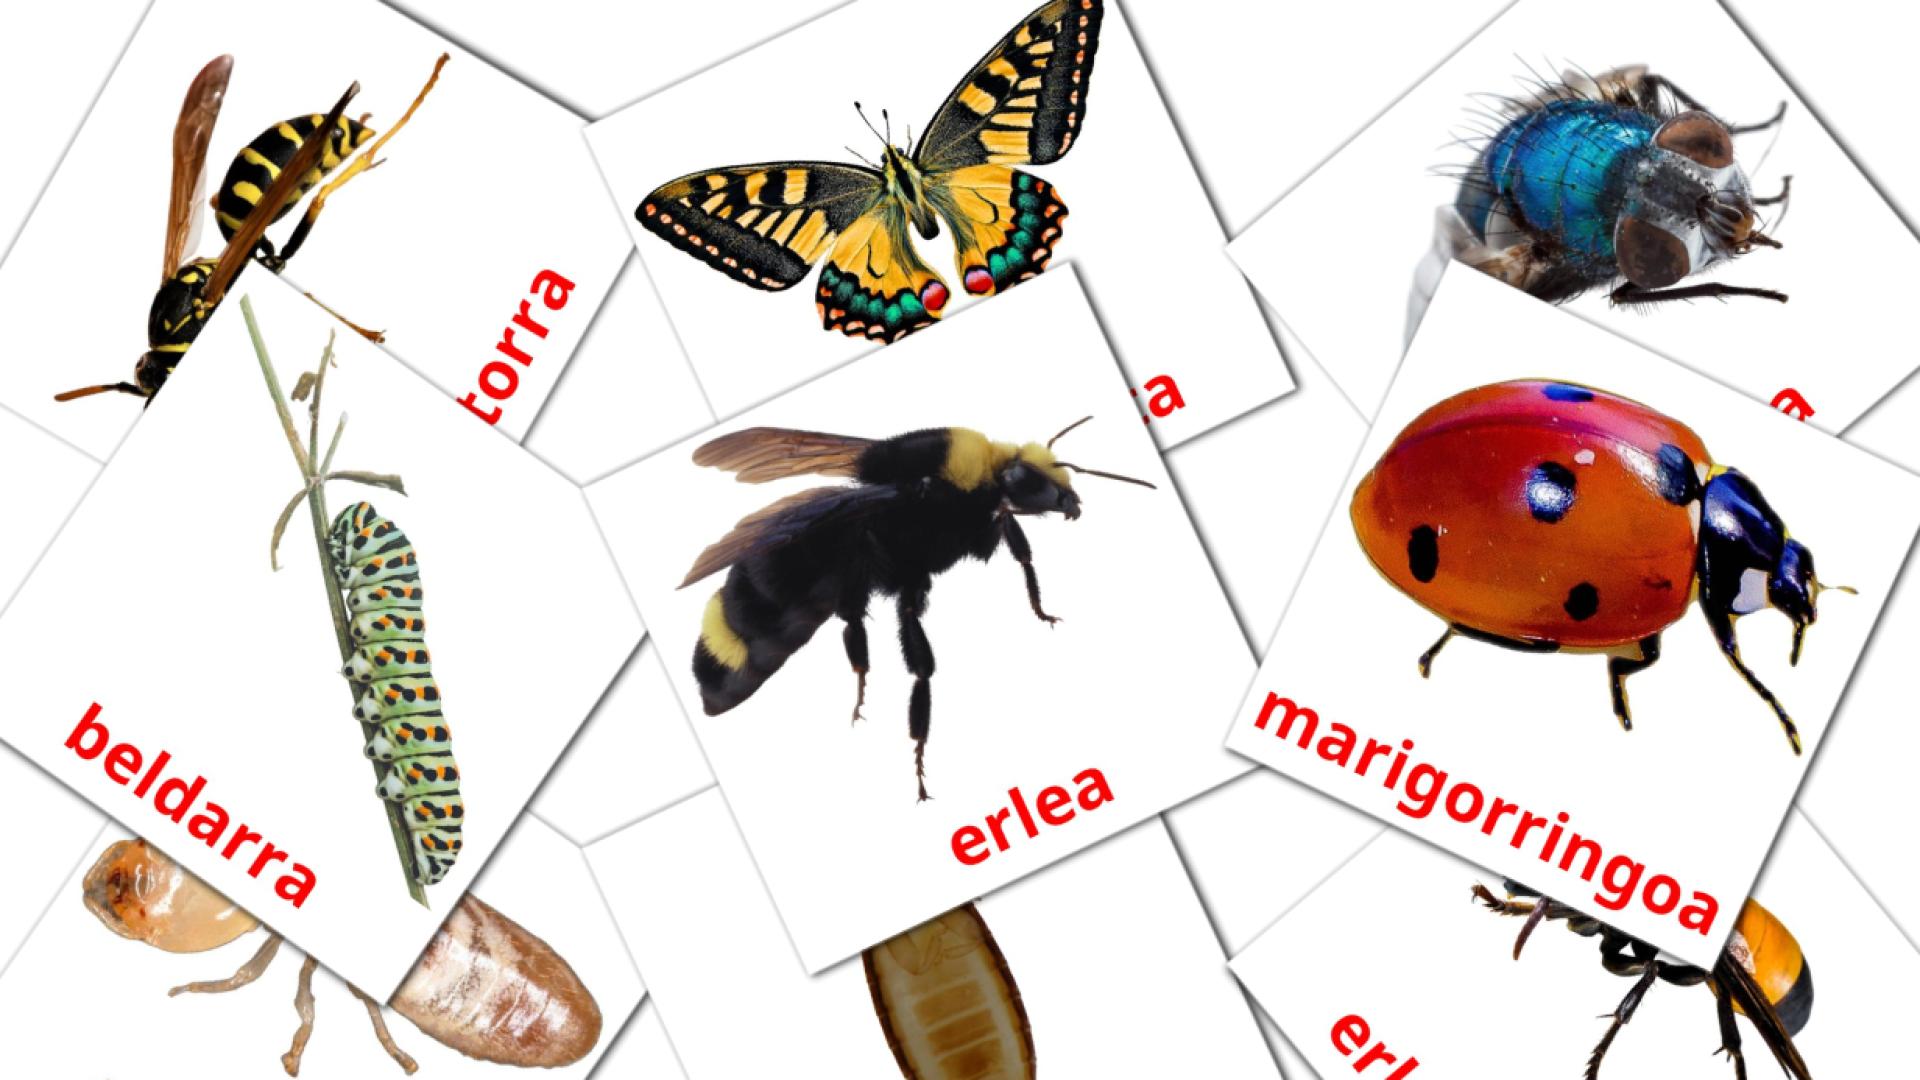 Insects - basque vocabulary cards